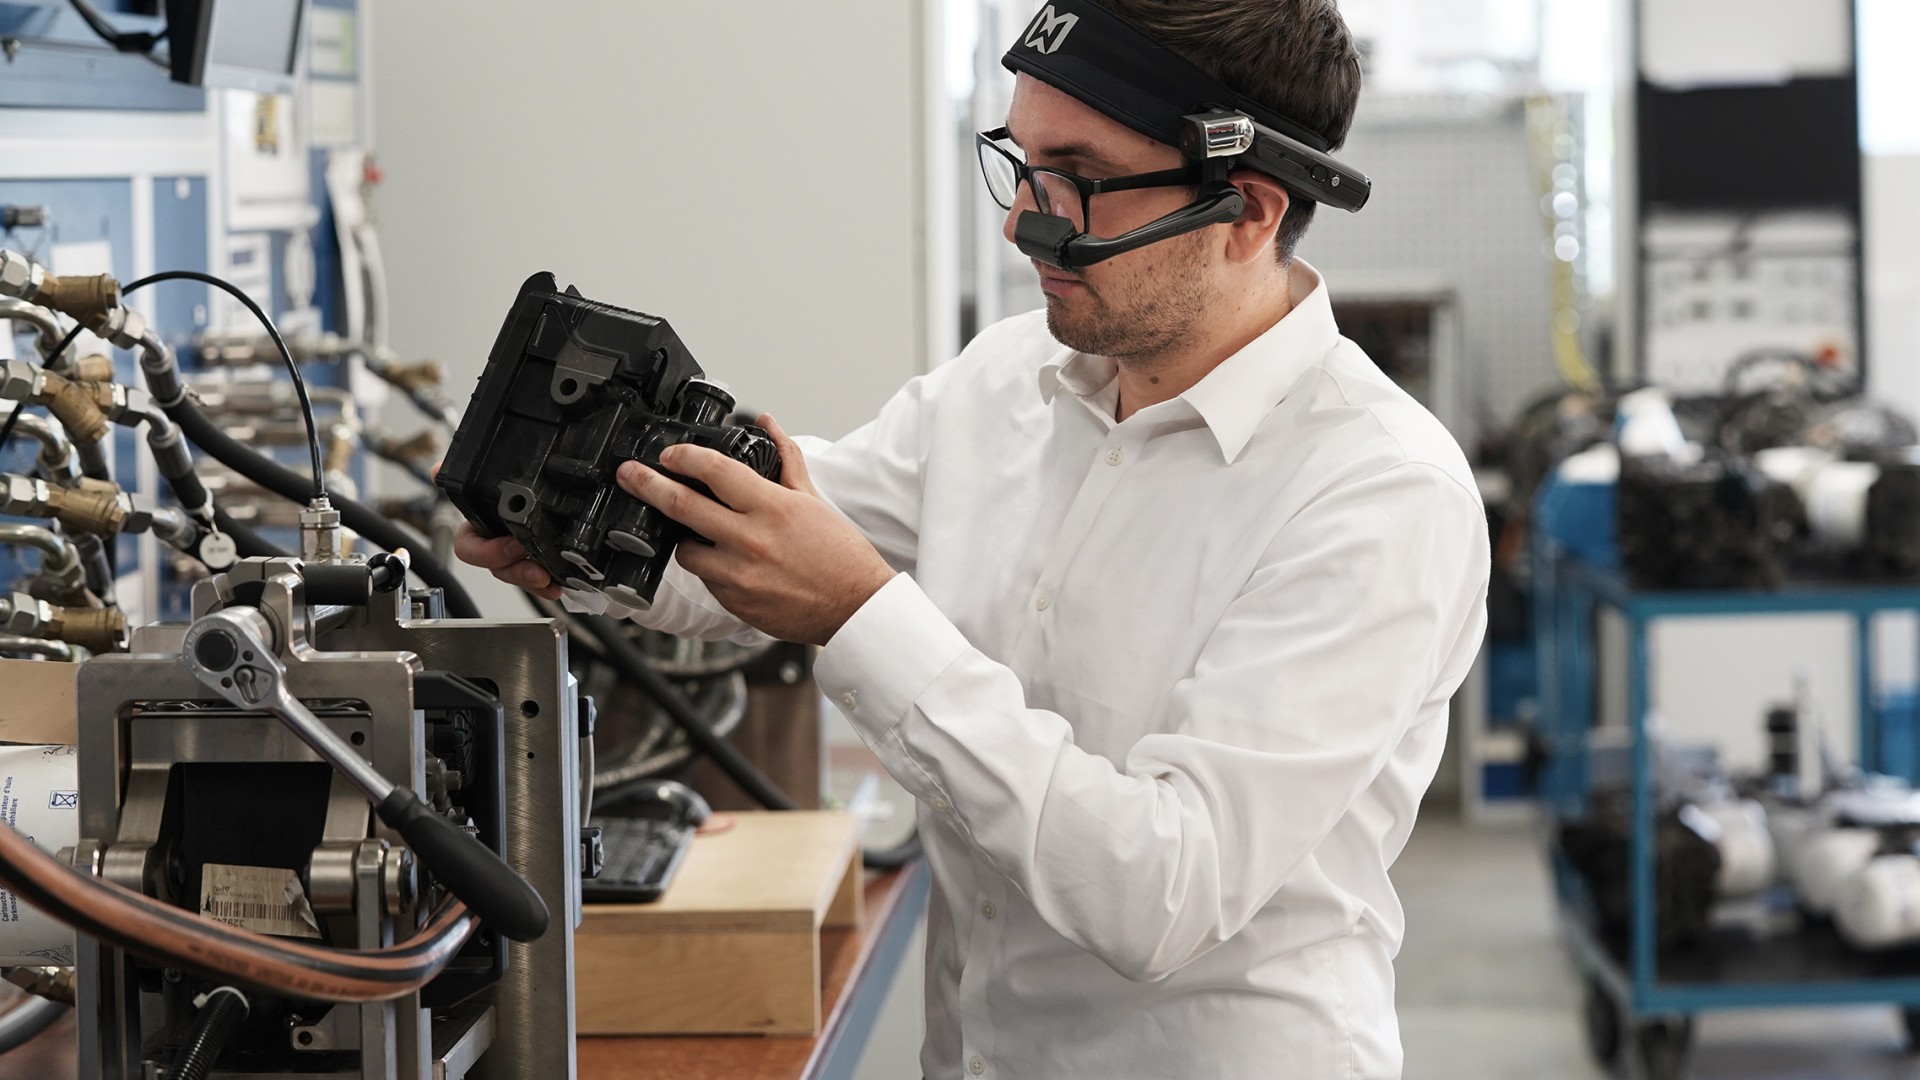 A Knorr-Bremse employee looks at a technical product through AR glasses.